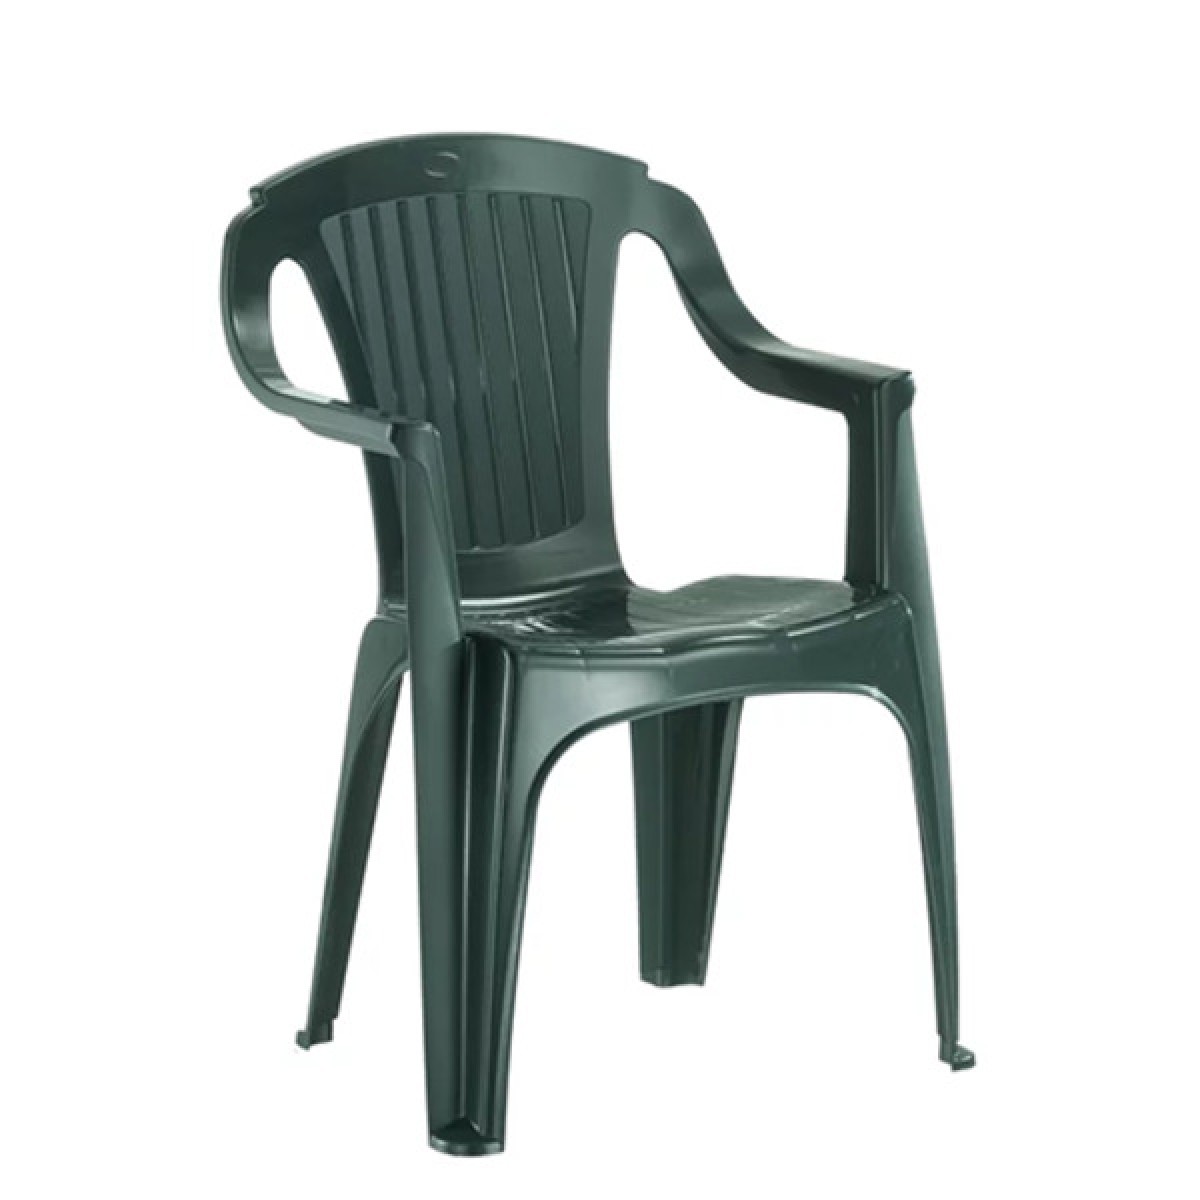 Pipee Plastic Chair with Arms, Stackable Outdoor Chairs